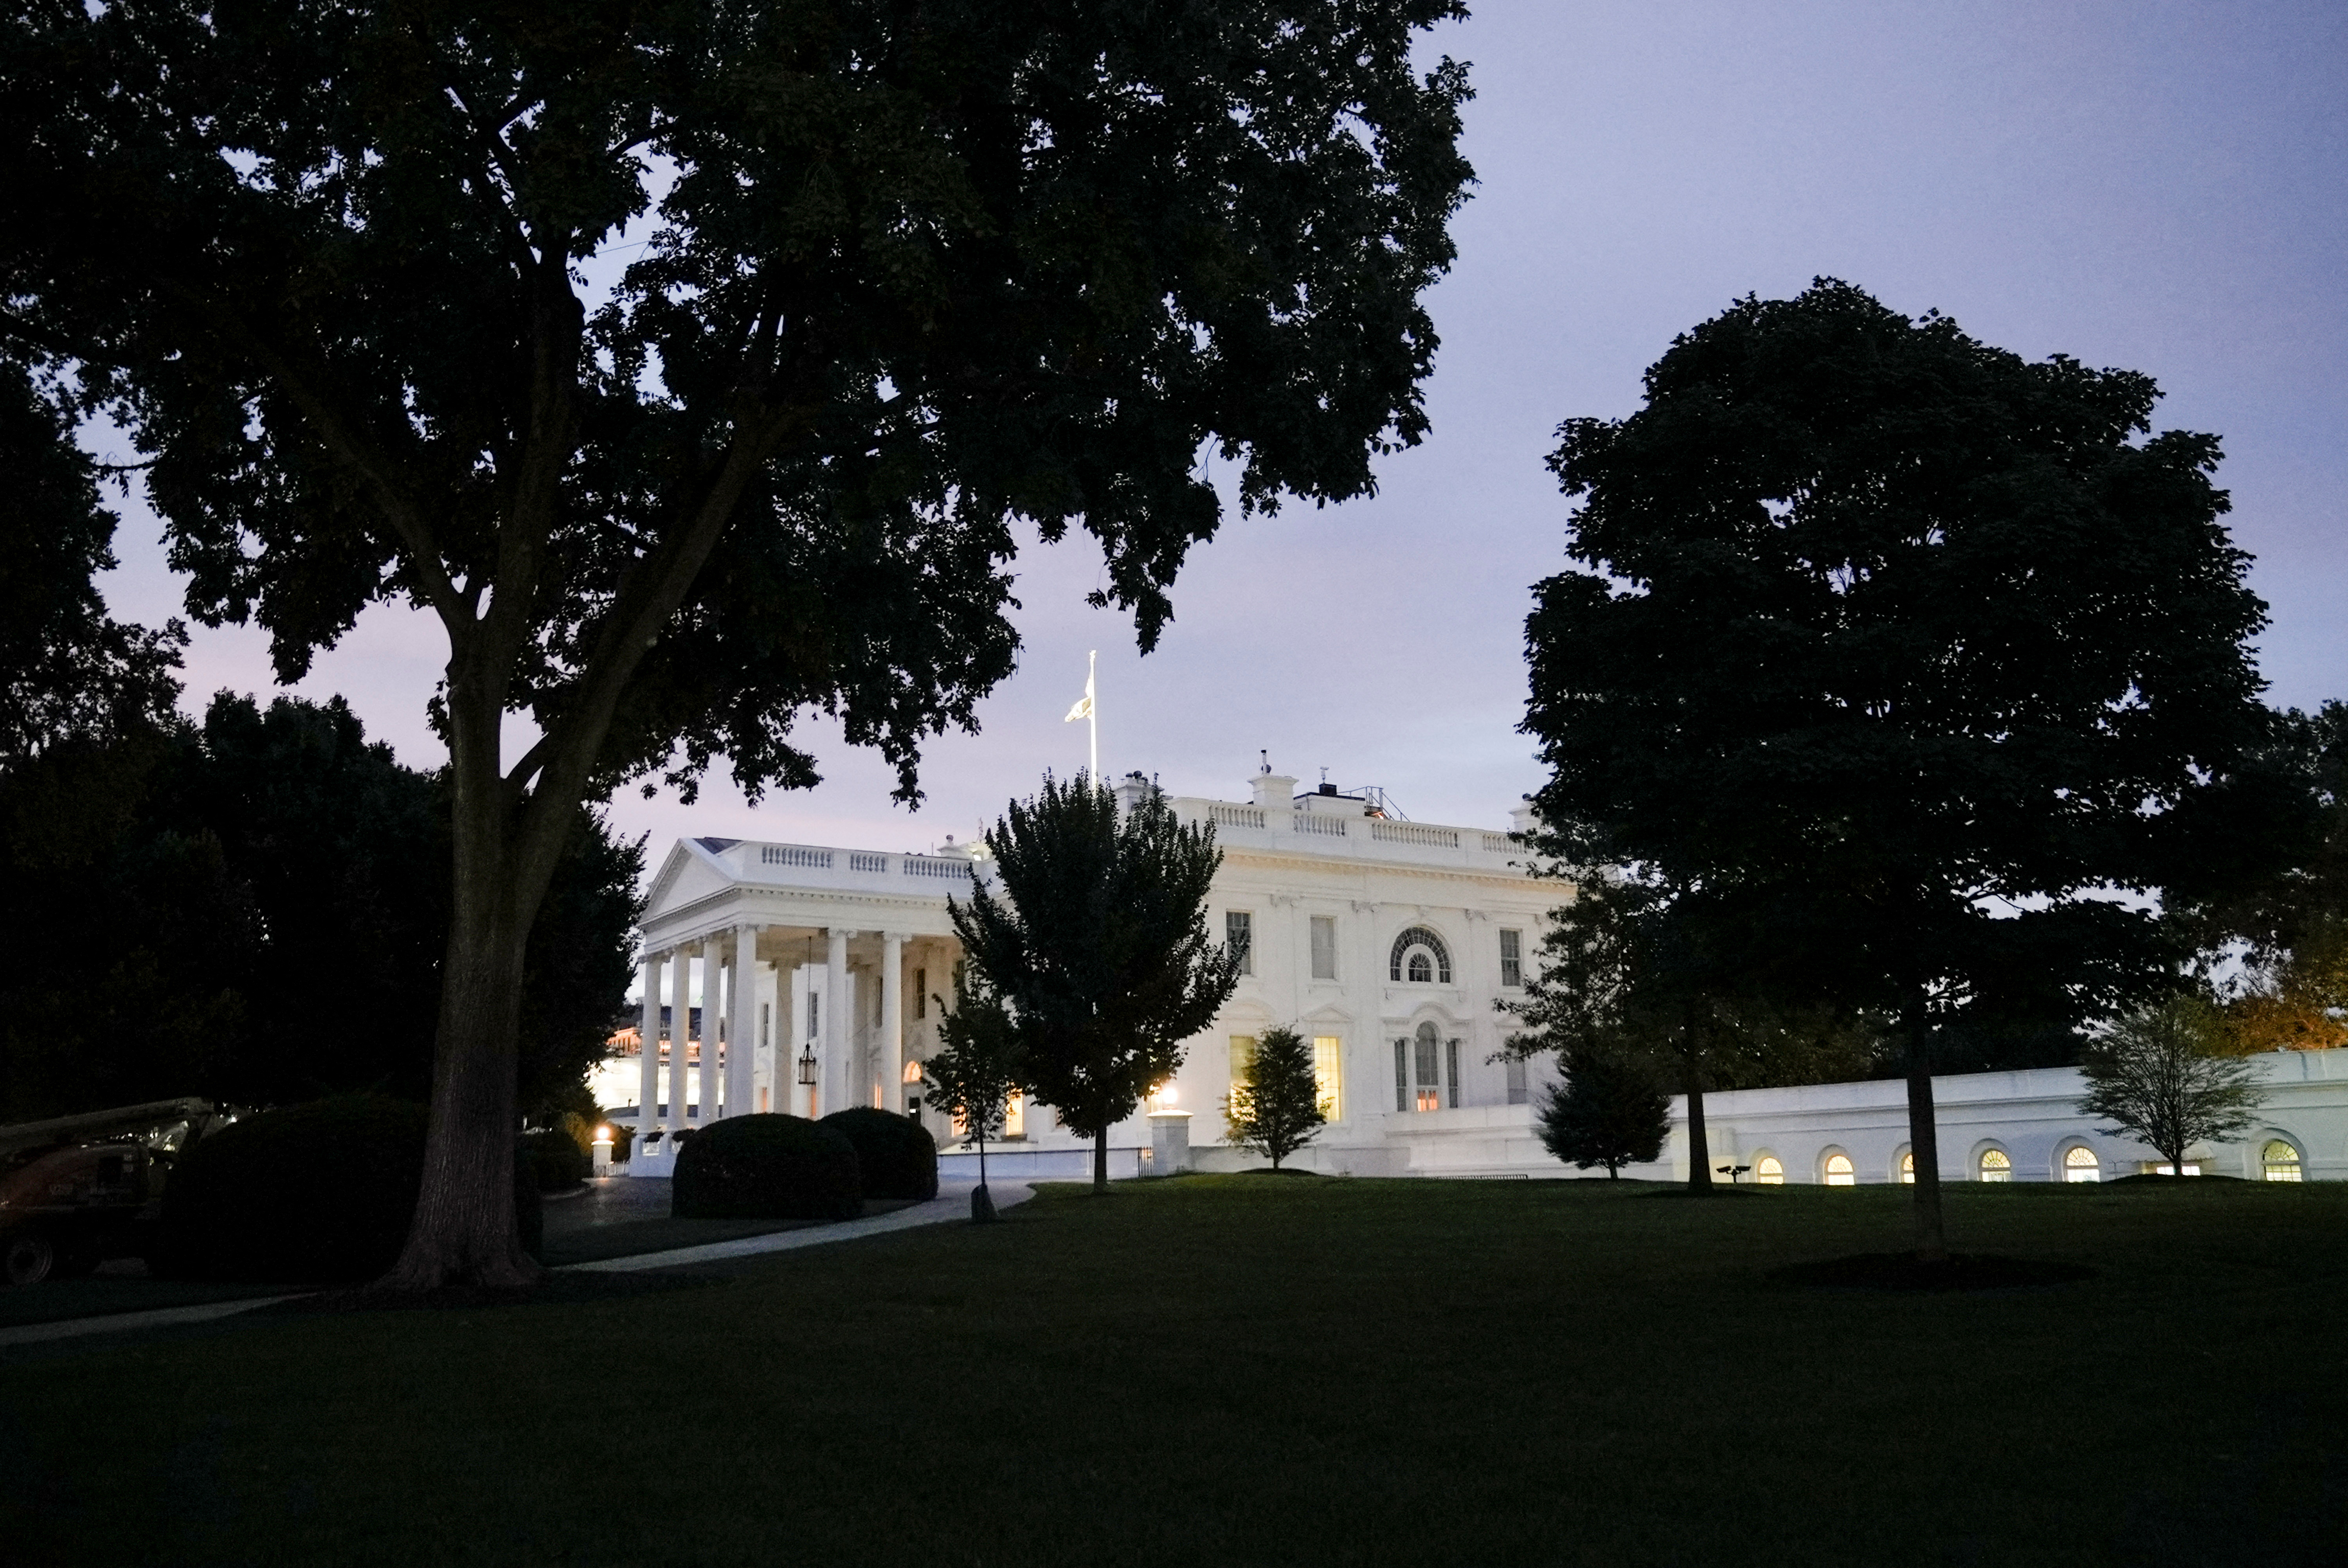 The White House is seen early in the morning in Washington, D.C., U.S.